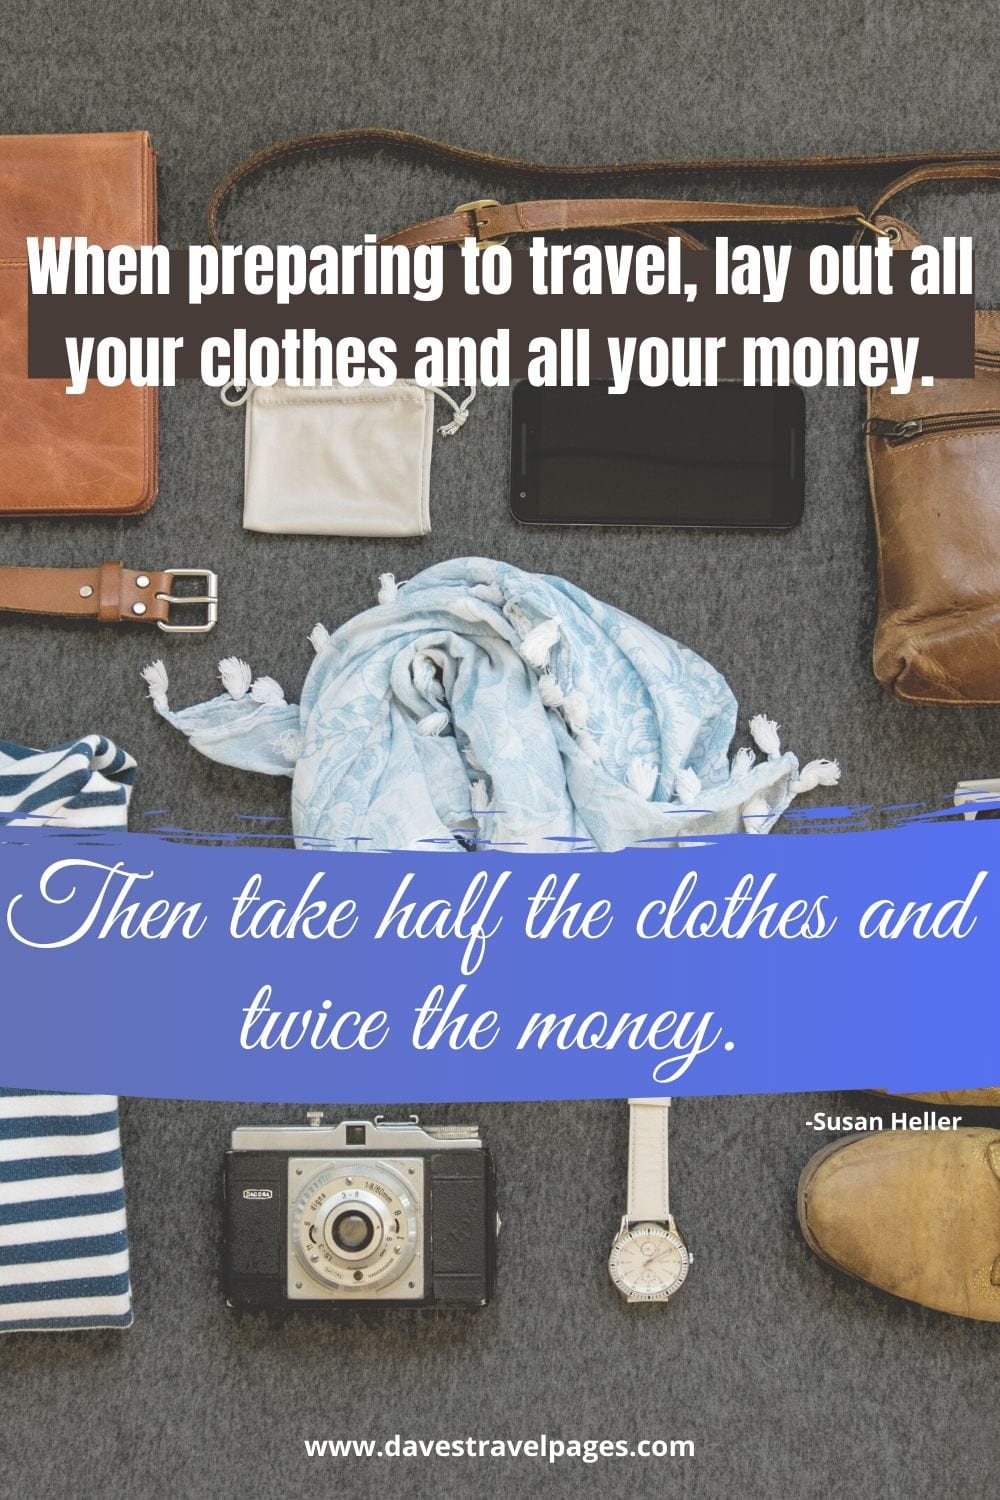 Famous quotes about traveling: When preparing to travel, lay out all your clothes and all your money. Then take half the clothes and twice the money.” -Susan Heller